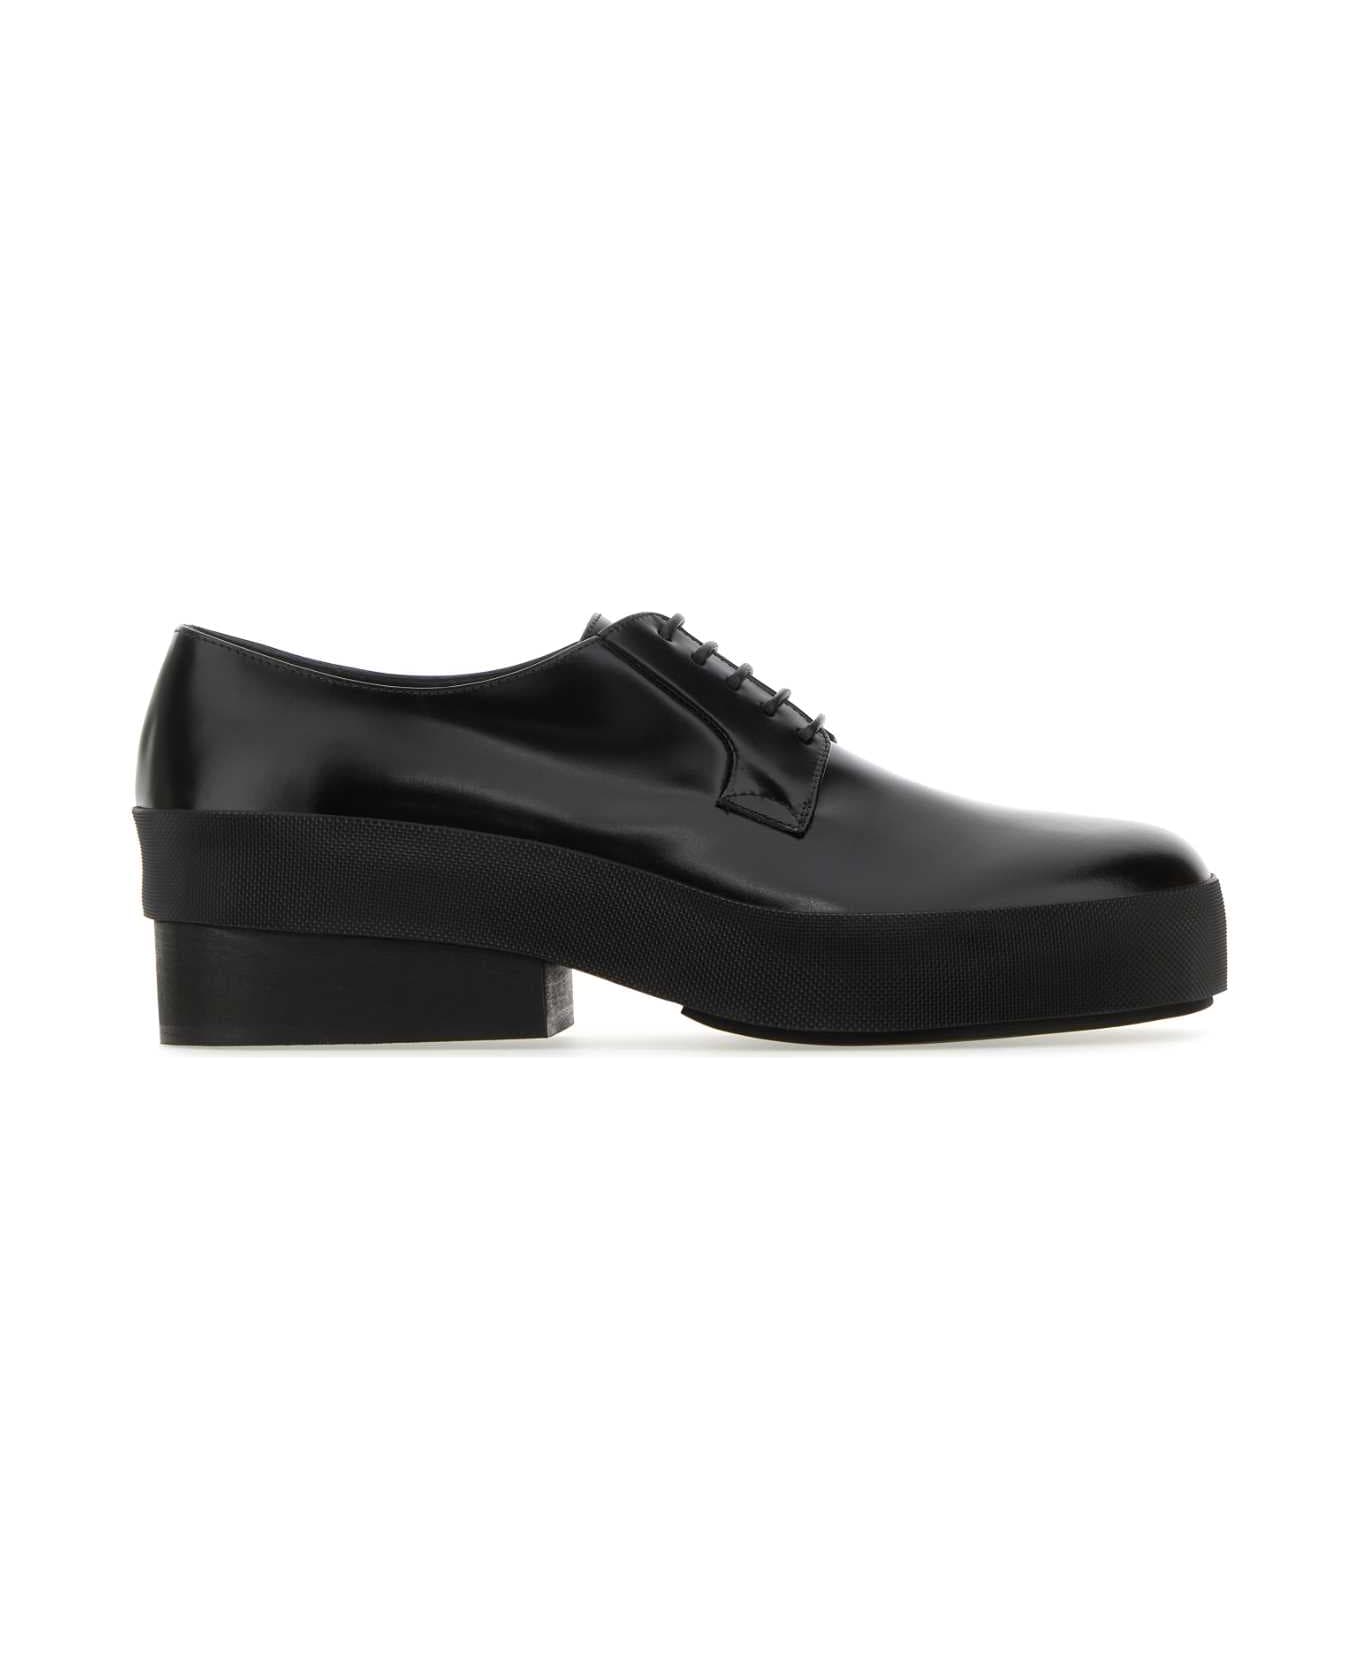 Raf Simons Black Leather Lace-up Shoes - 0099